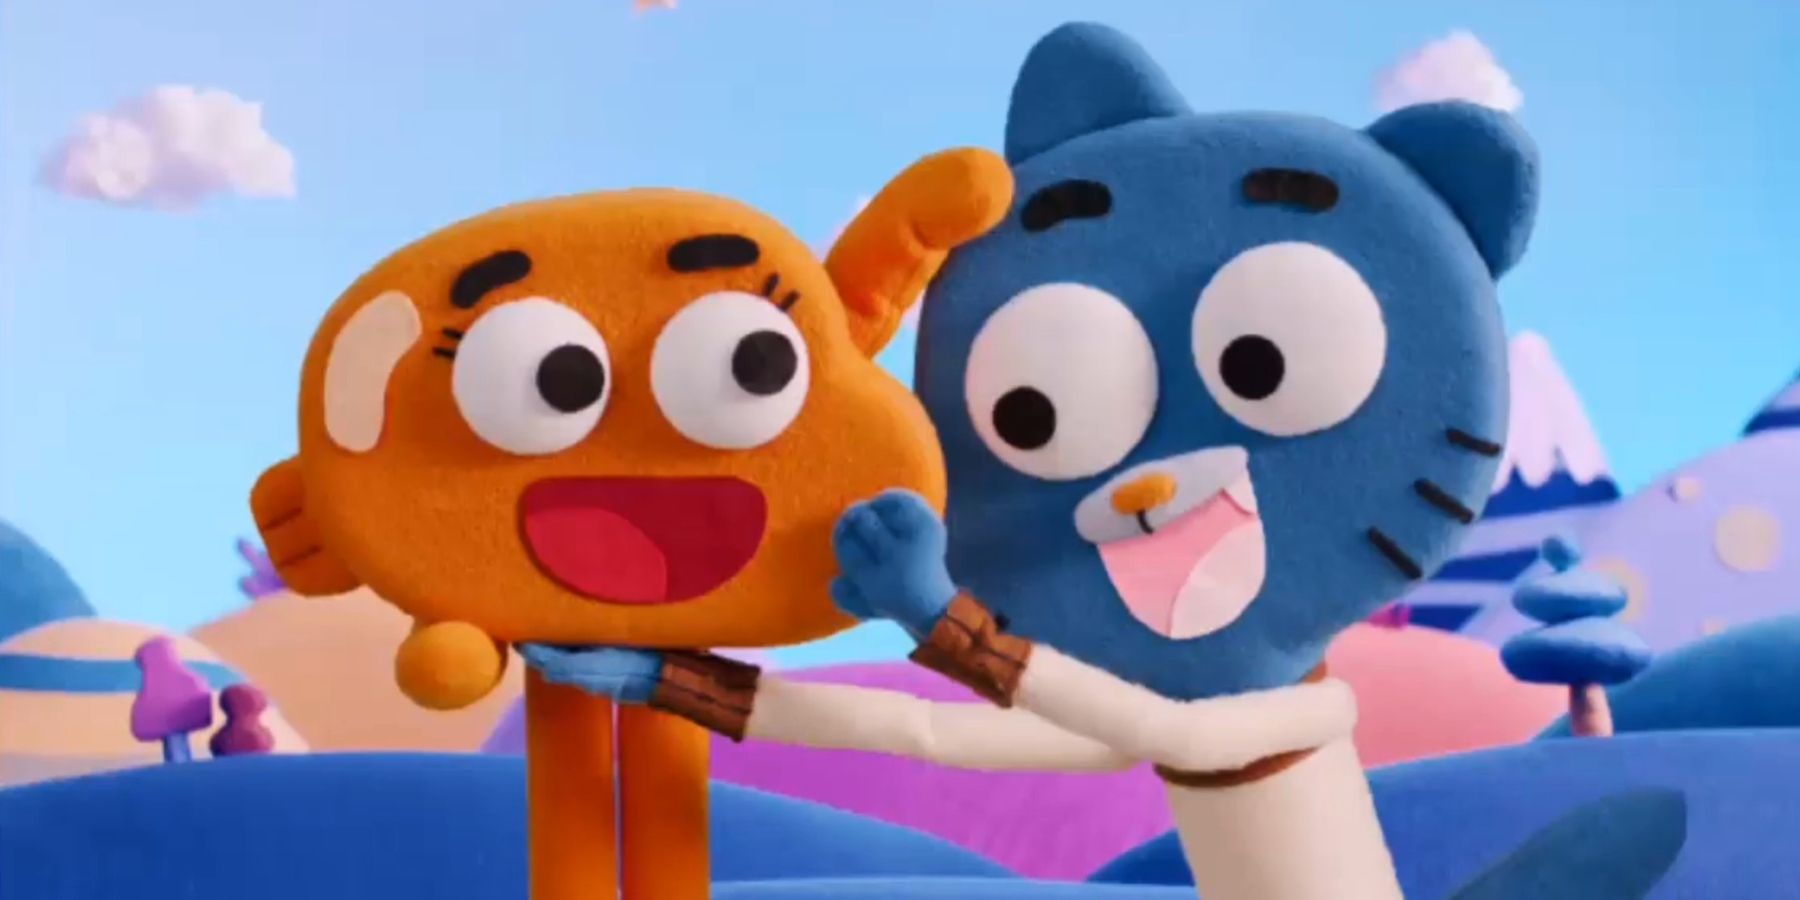 what is the song in the amazing world of gumball episode, the one?